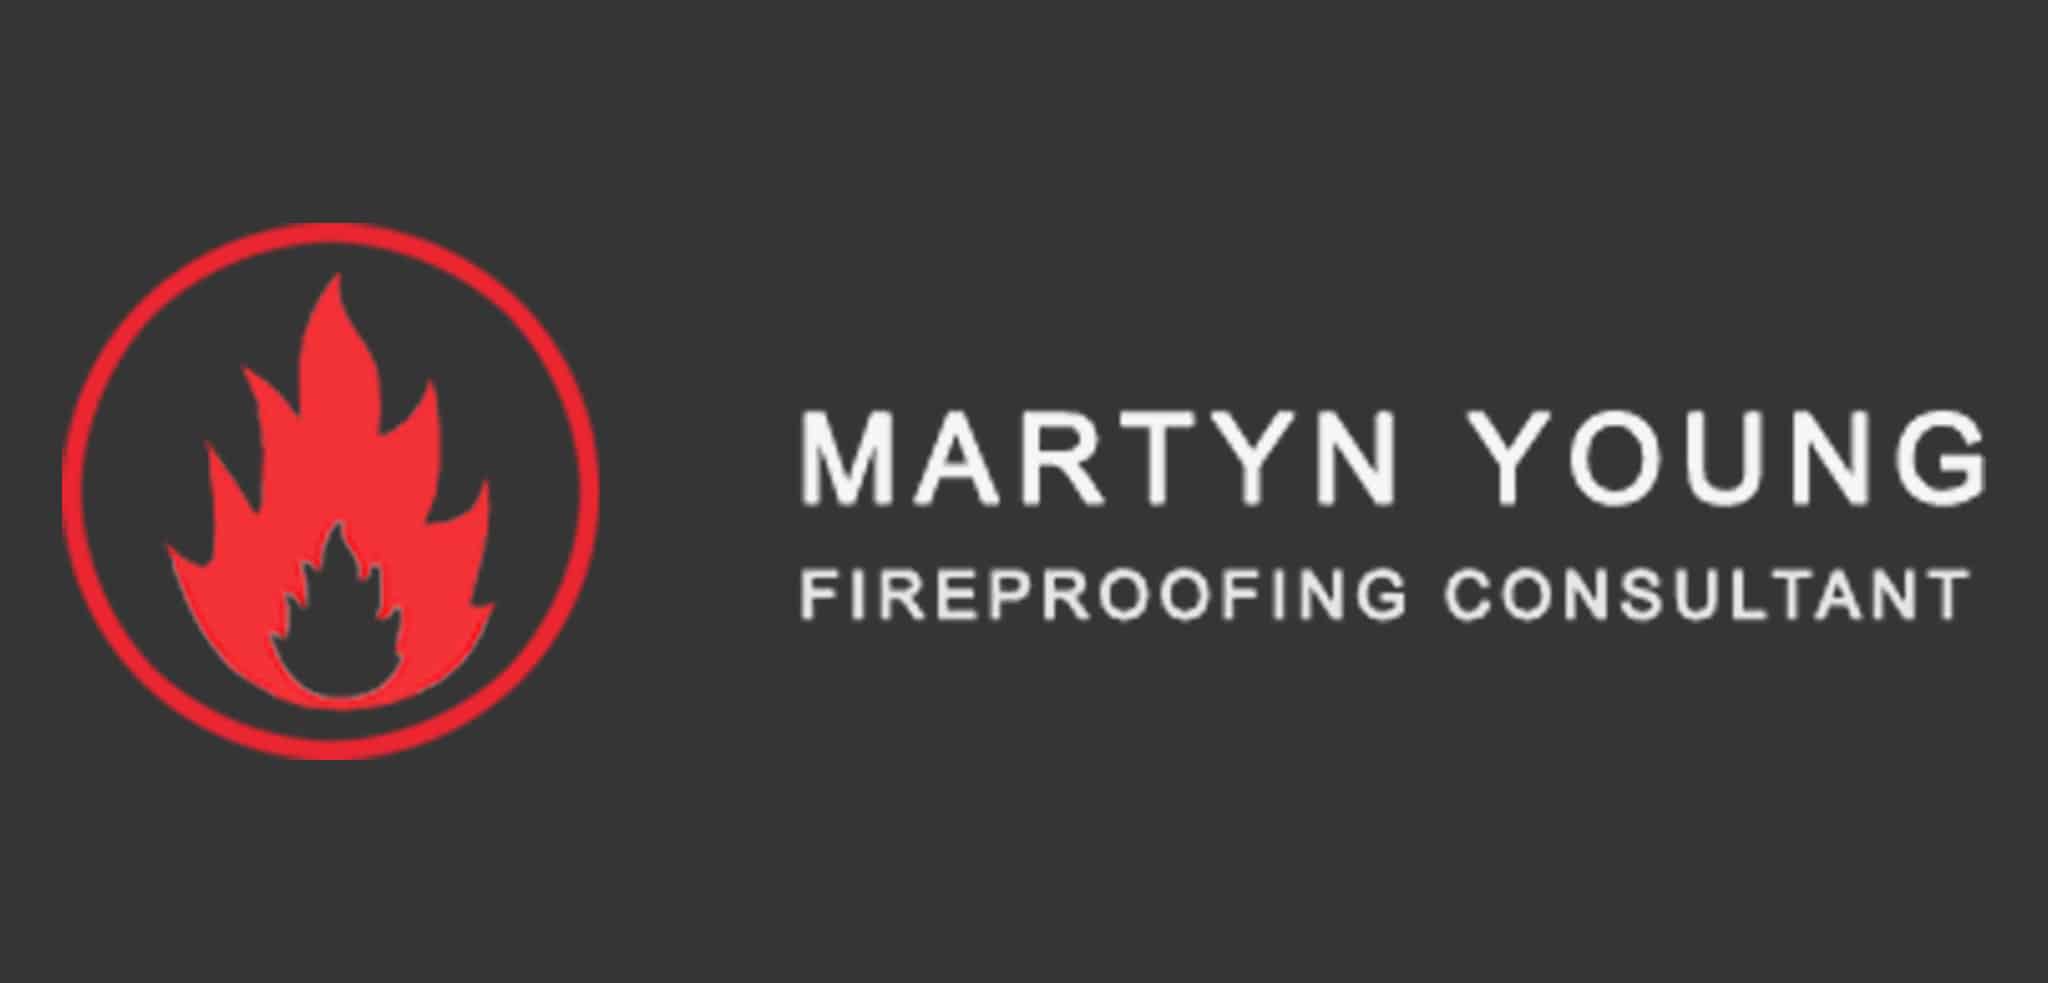 Martyn Young Fireproofing Consultancy Logo